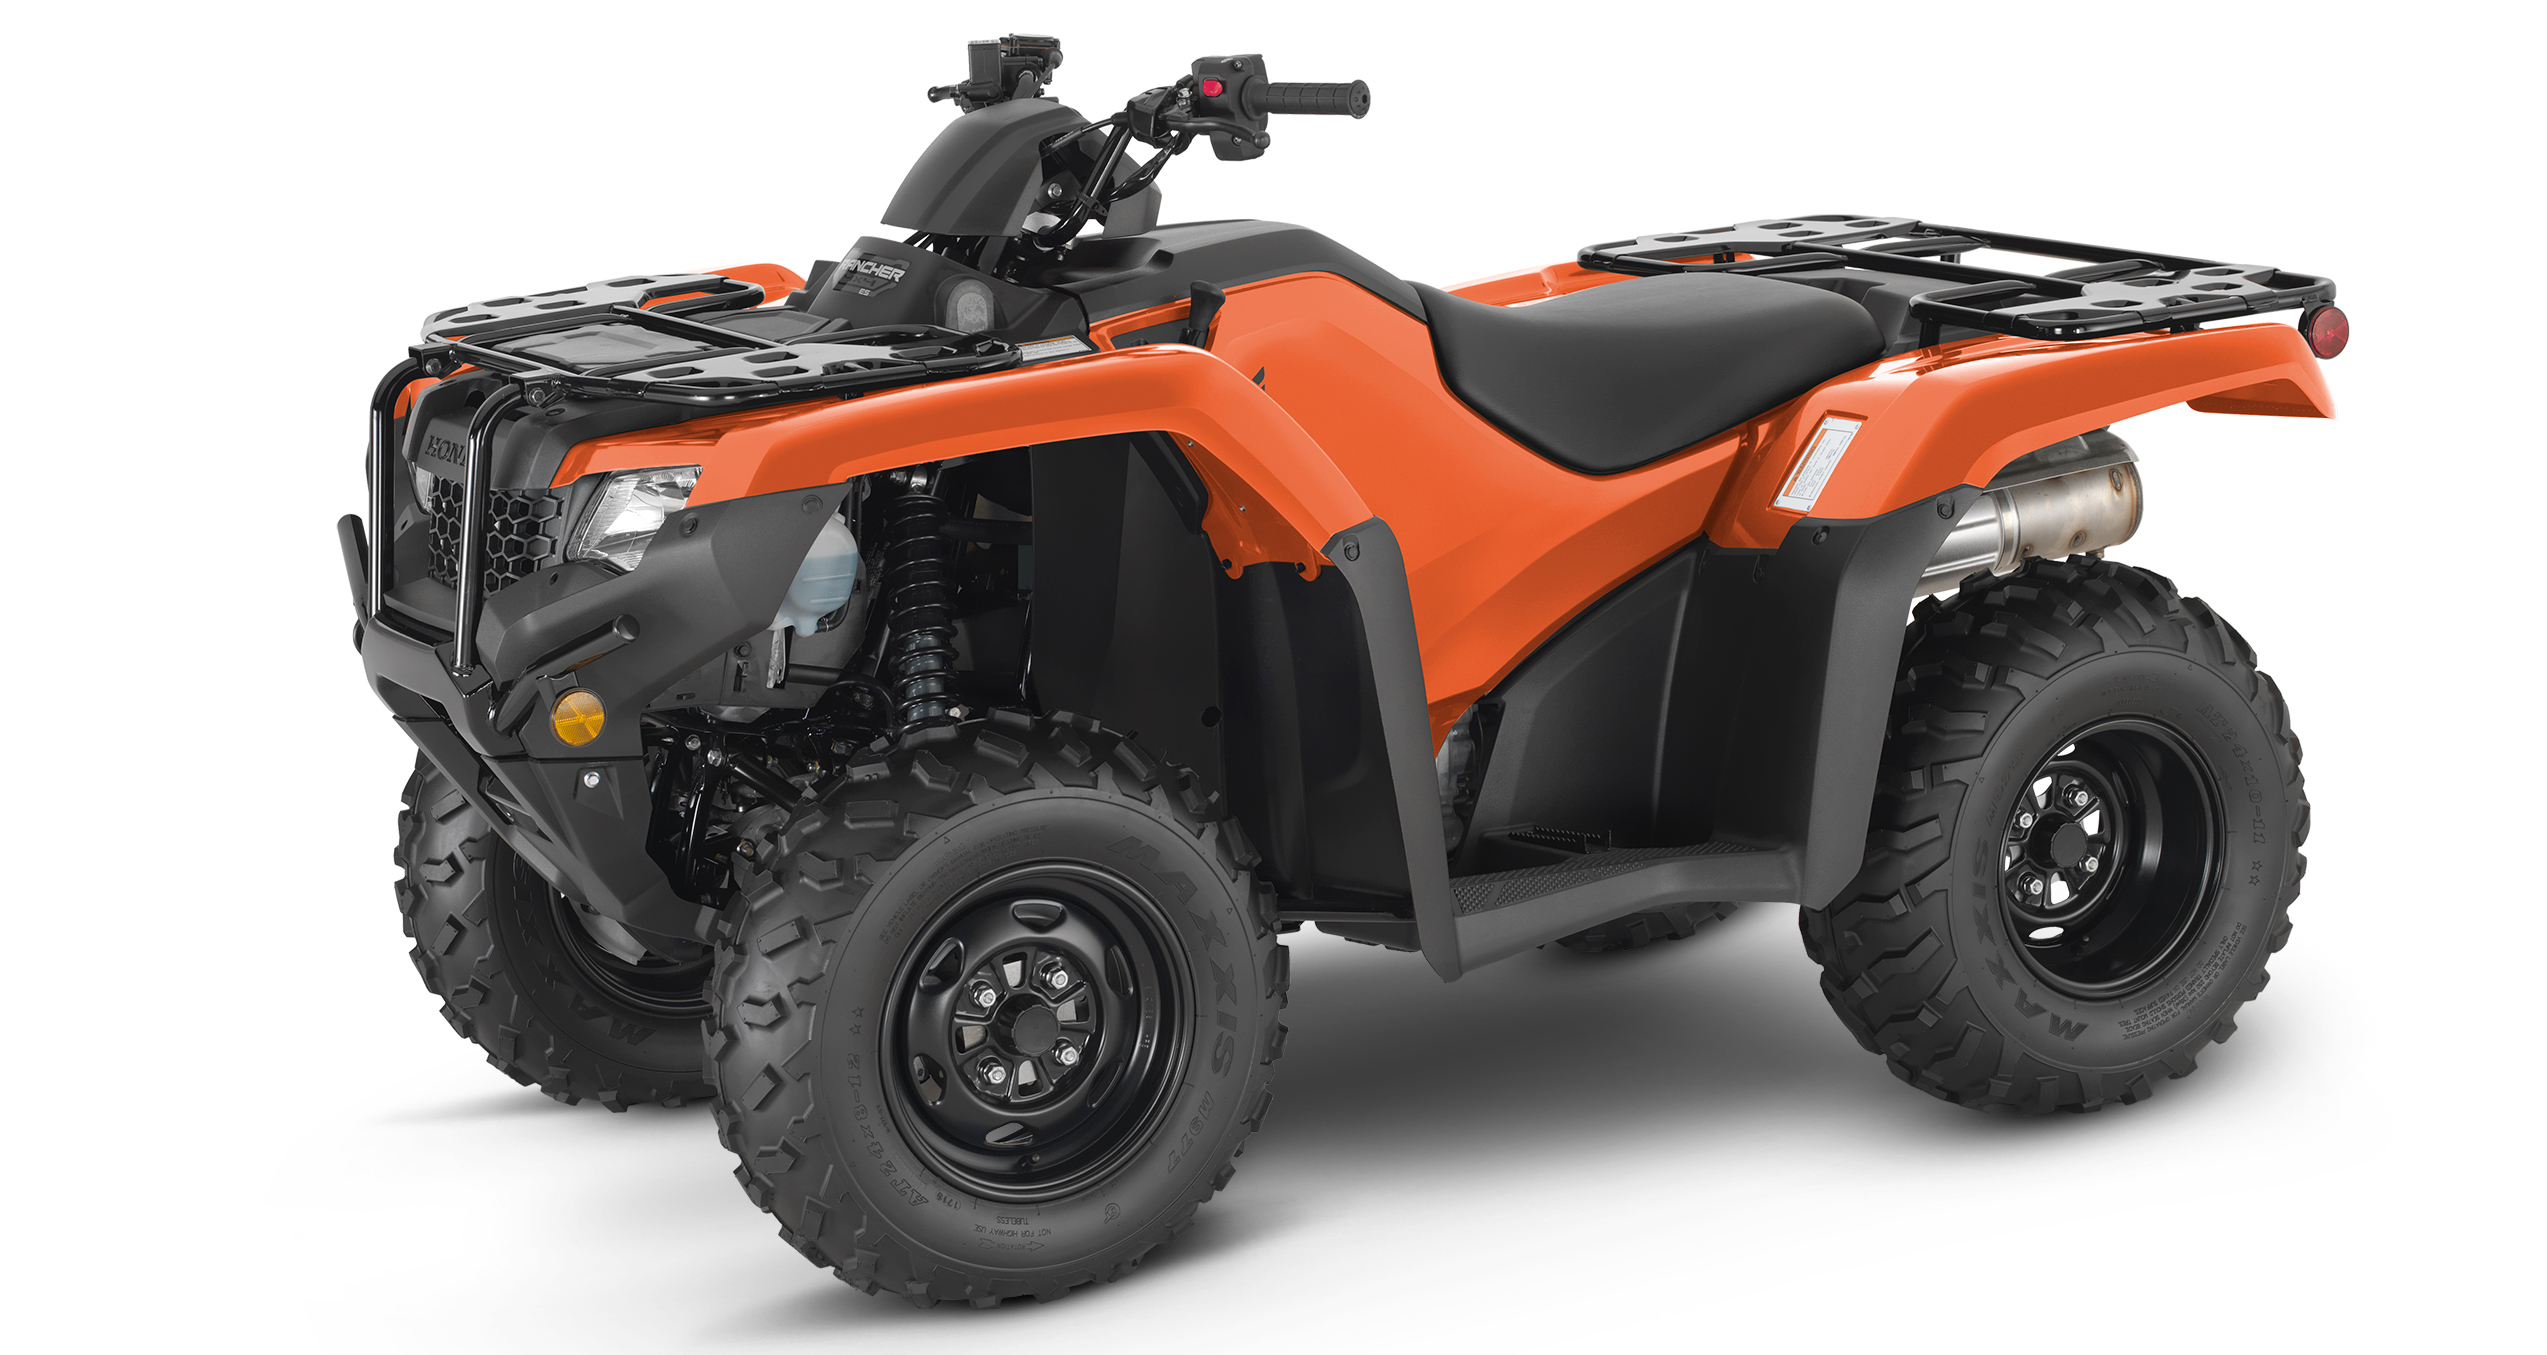 Honda reveals returning ATVs and side-by-sides